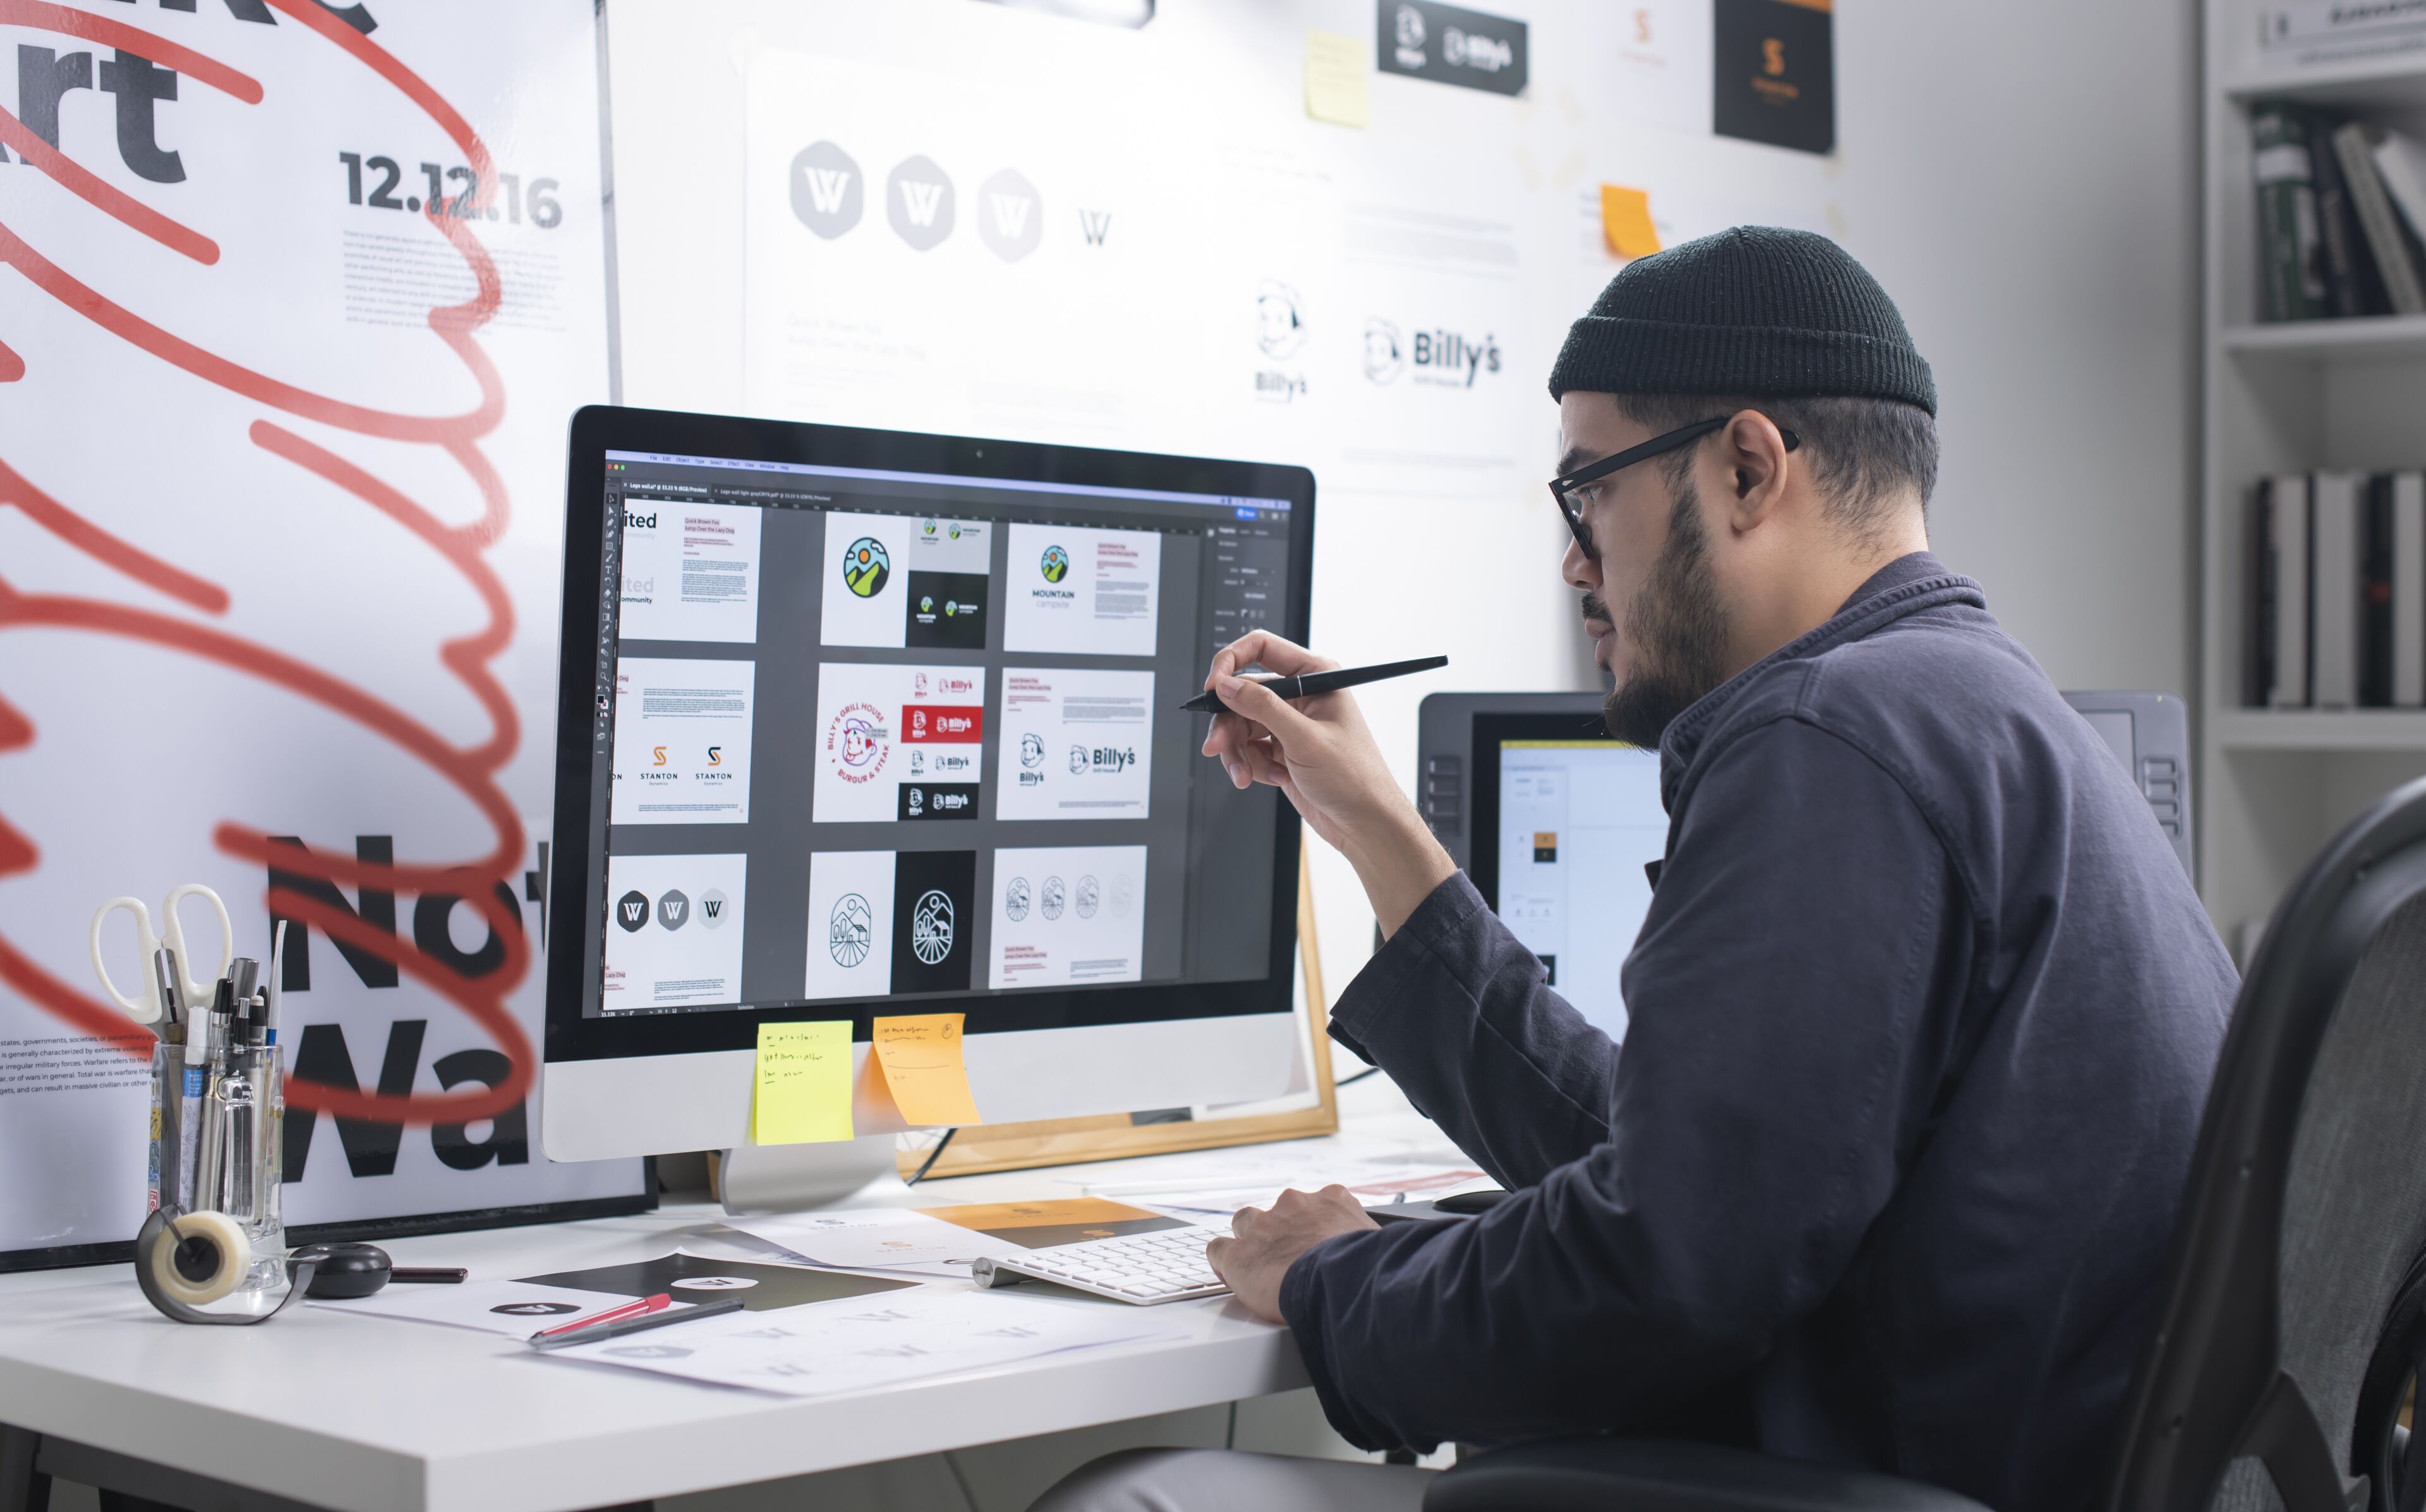 A male graphic designer wearing a beanie reviews designs on a large monitor, stylus in hand, in a well-organized workspace.